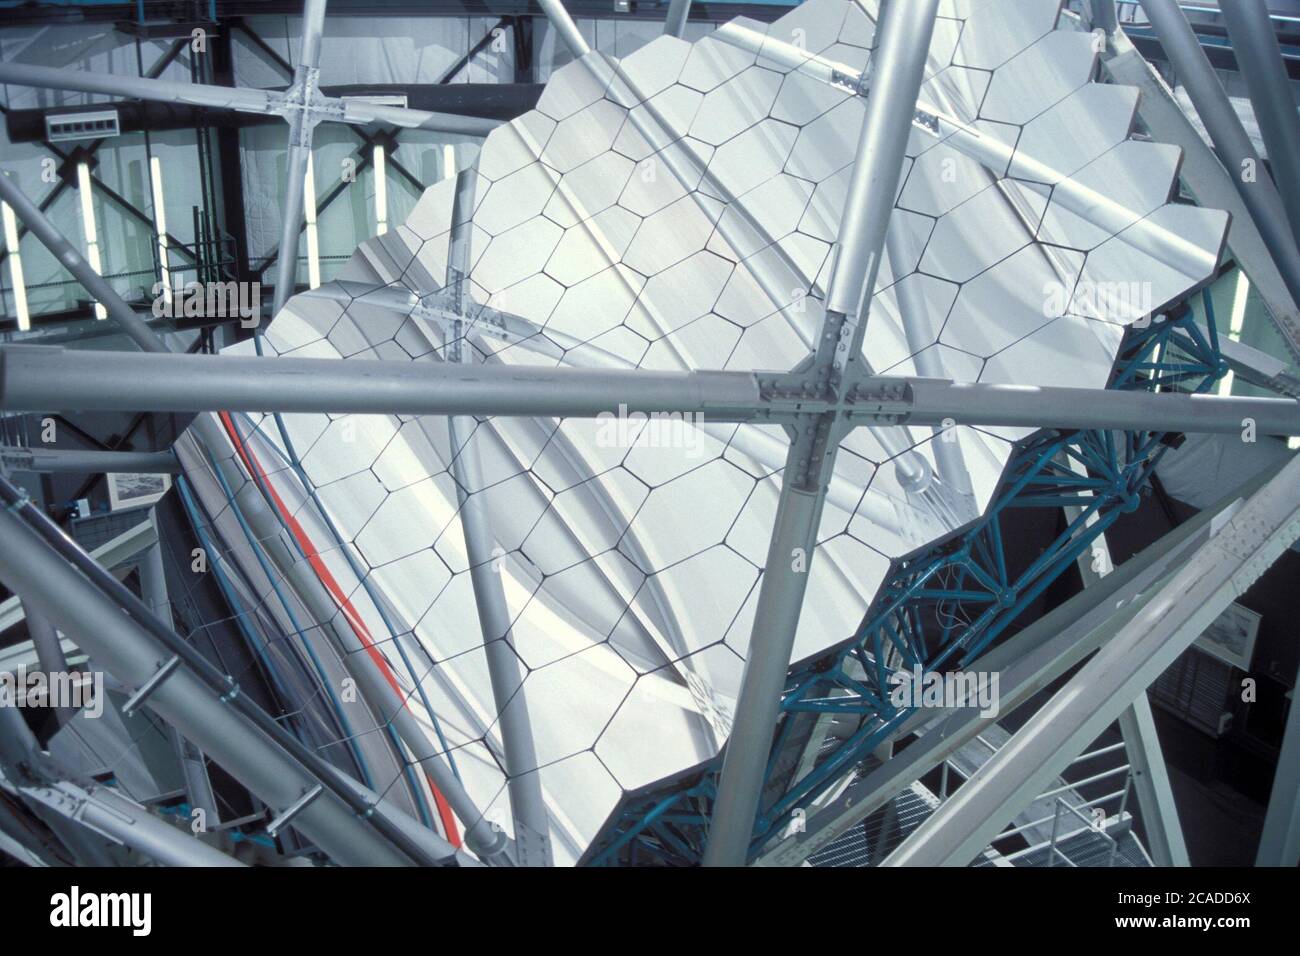 Jeff Davis County Texas, USA, October 1997: Portion of mirror of the 432-inch Hobby-Eberly telescope at the University of Texas's McDonald Observatory Stock Photo